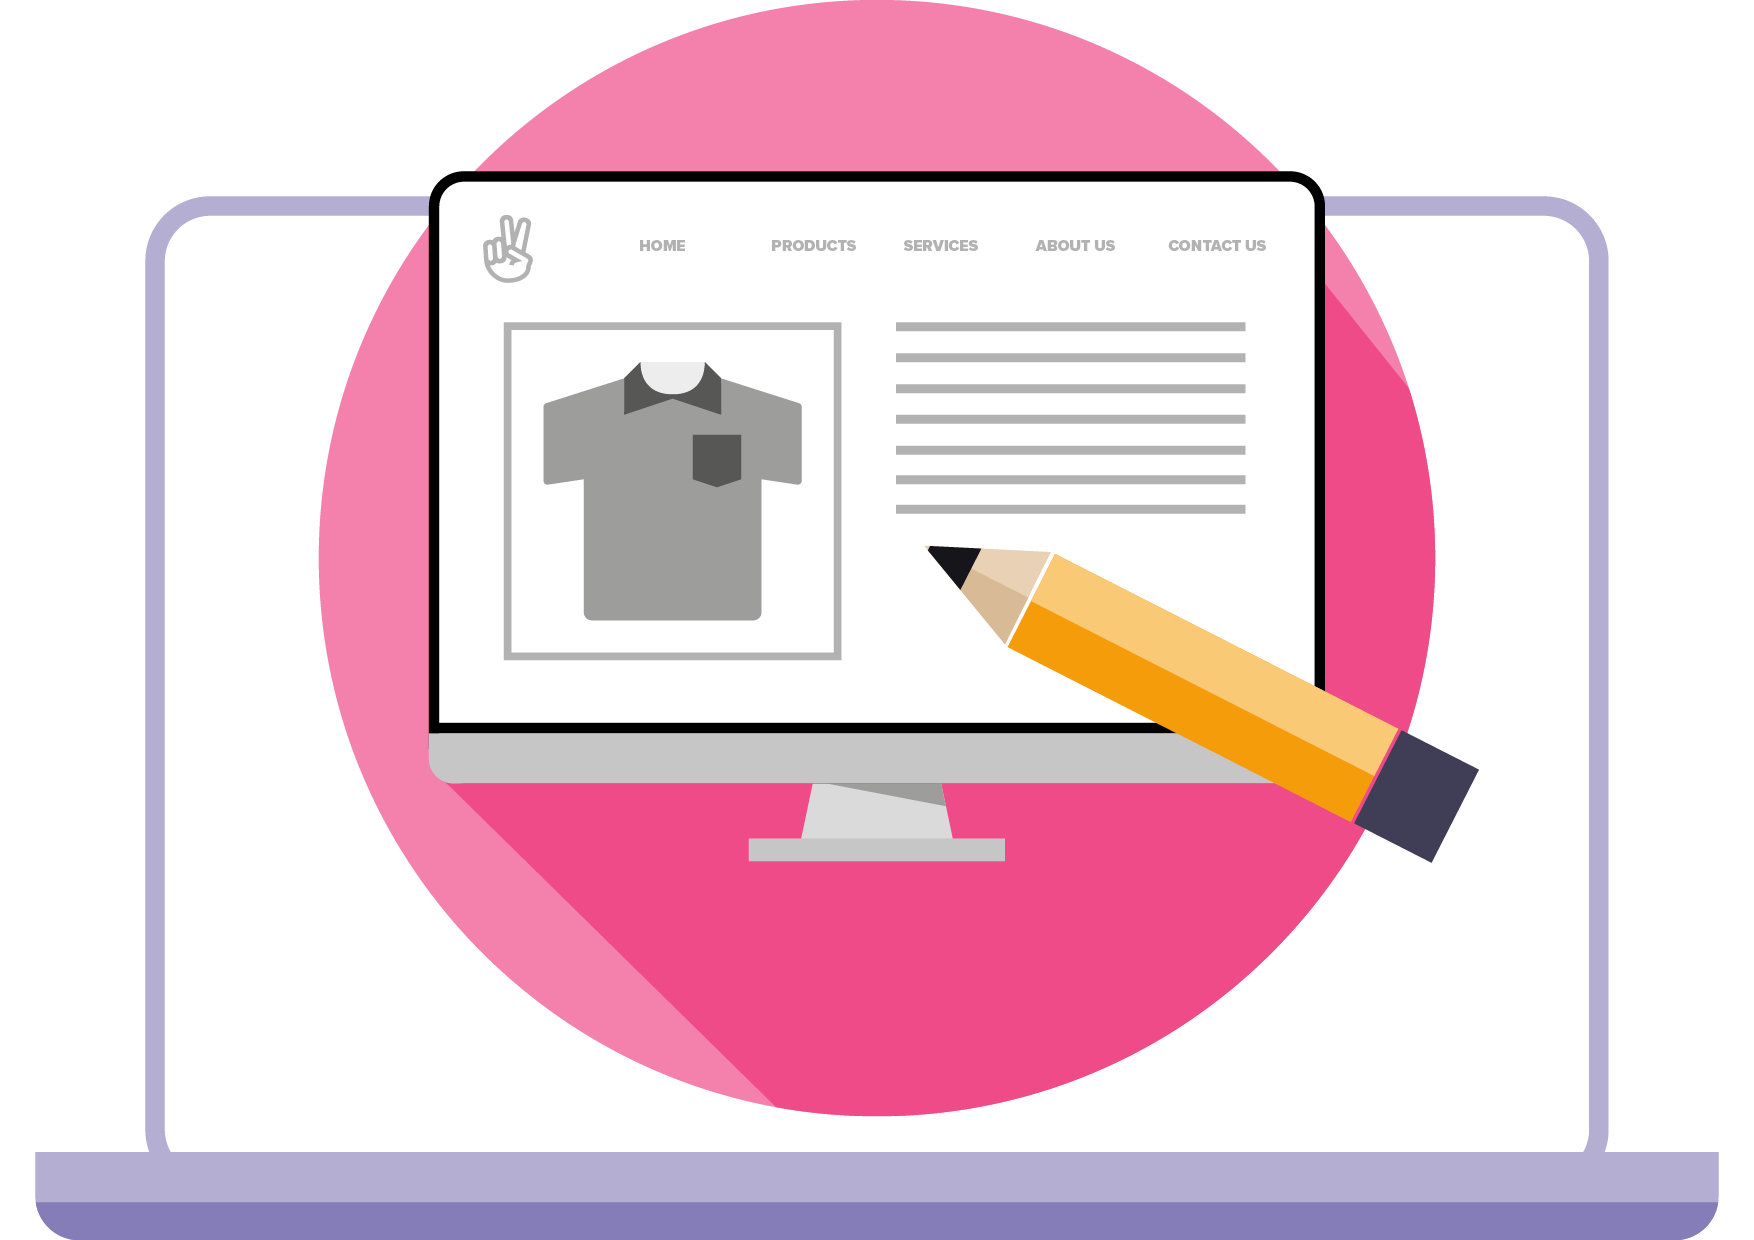 WooCommerce Product Page user experience tutorial